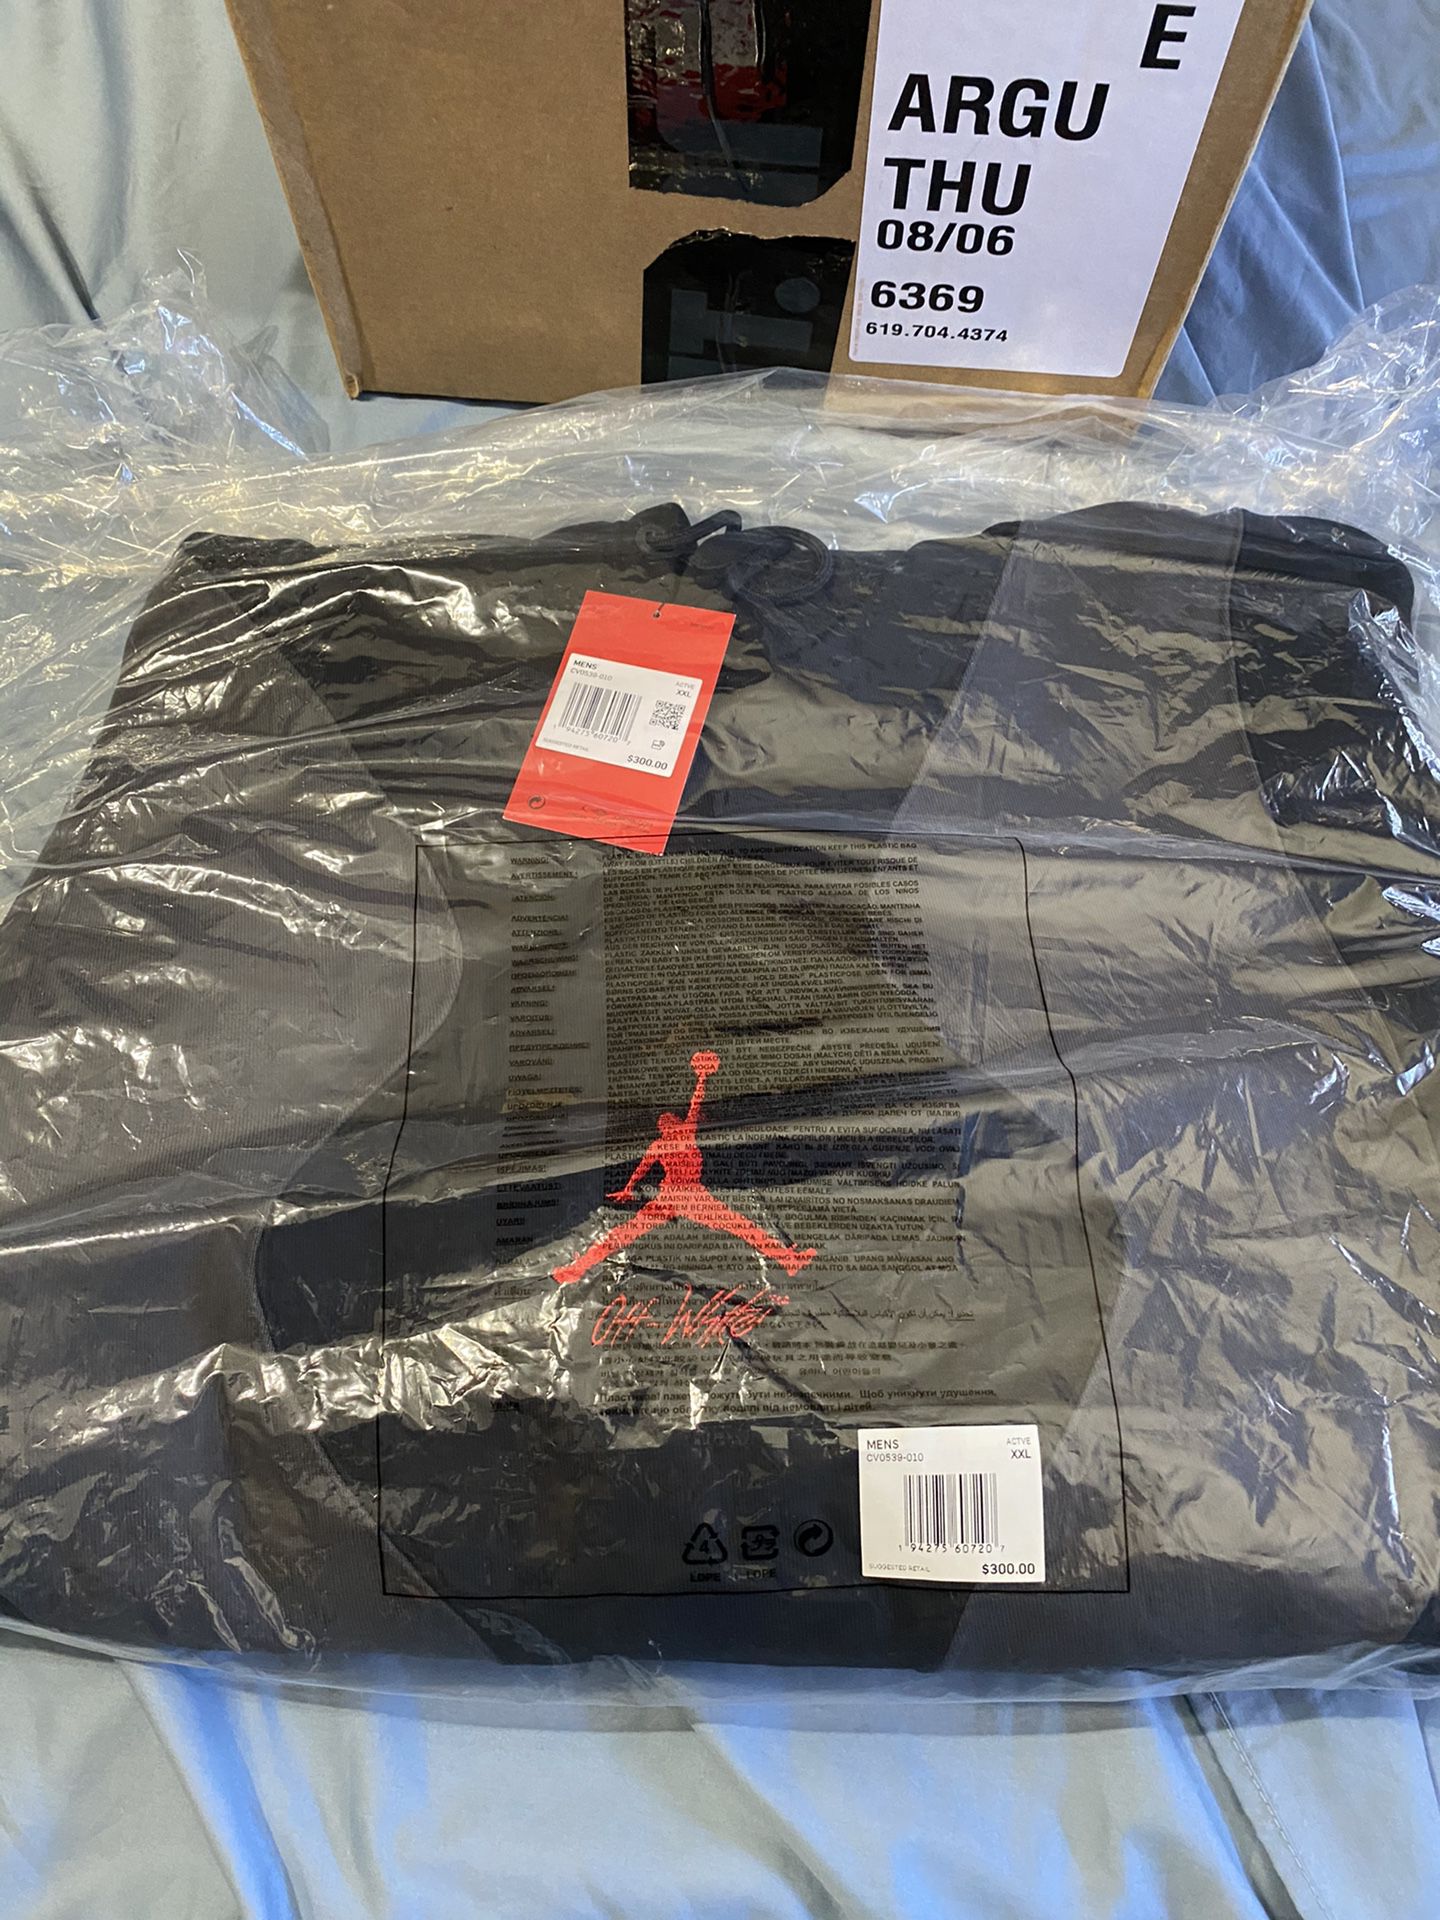 DreamQrew Space Jam hoodie. Supreme Louis Vuitton Adidas Nike Jordan Retro  Boost Shoes Sneakers Hoodie LV Bape OffWhite Off White DS for Sale in  Irvine, CA - OfferUp